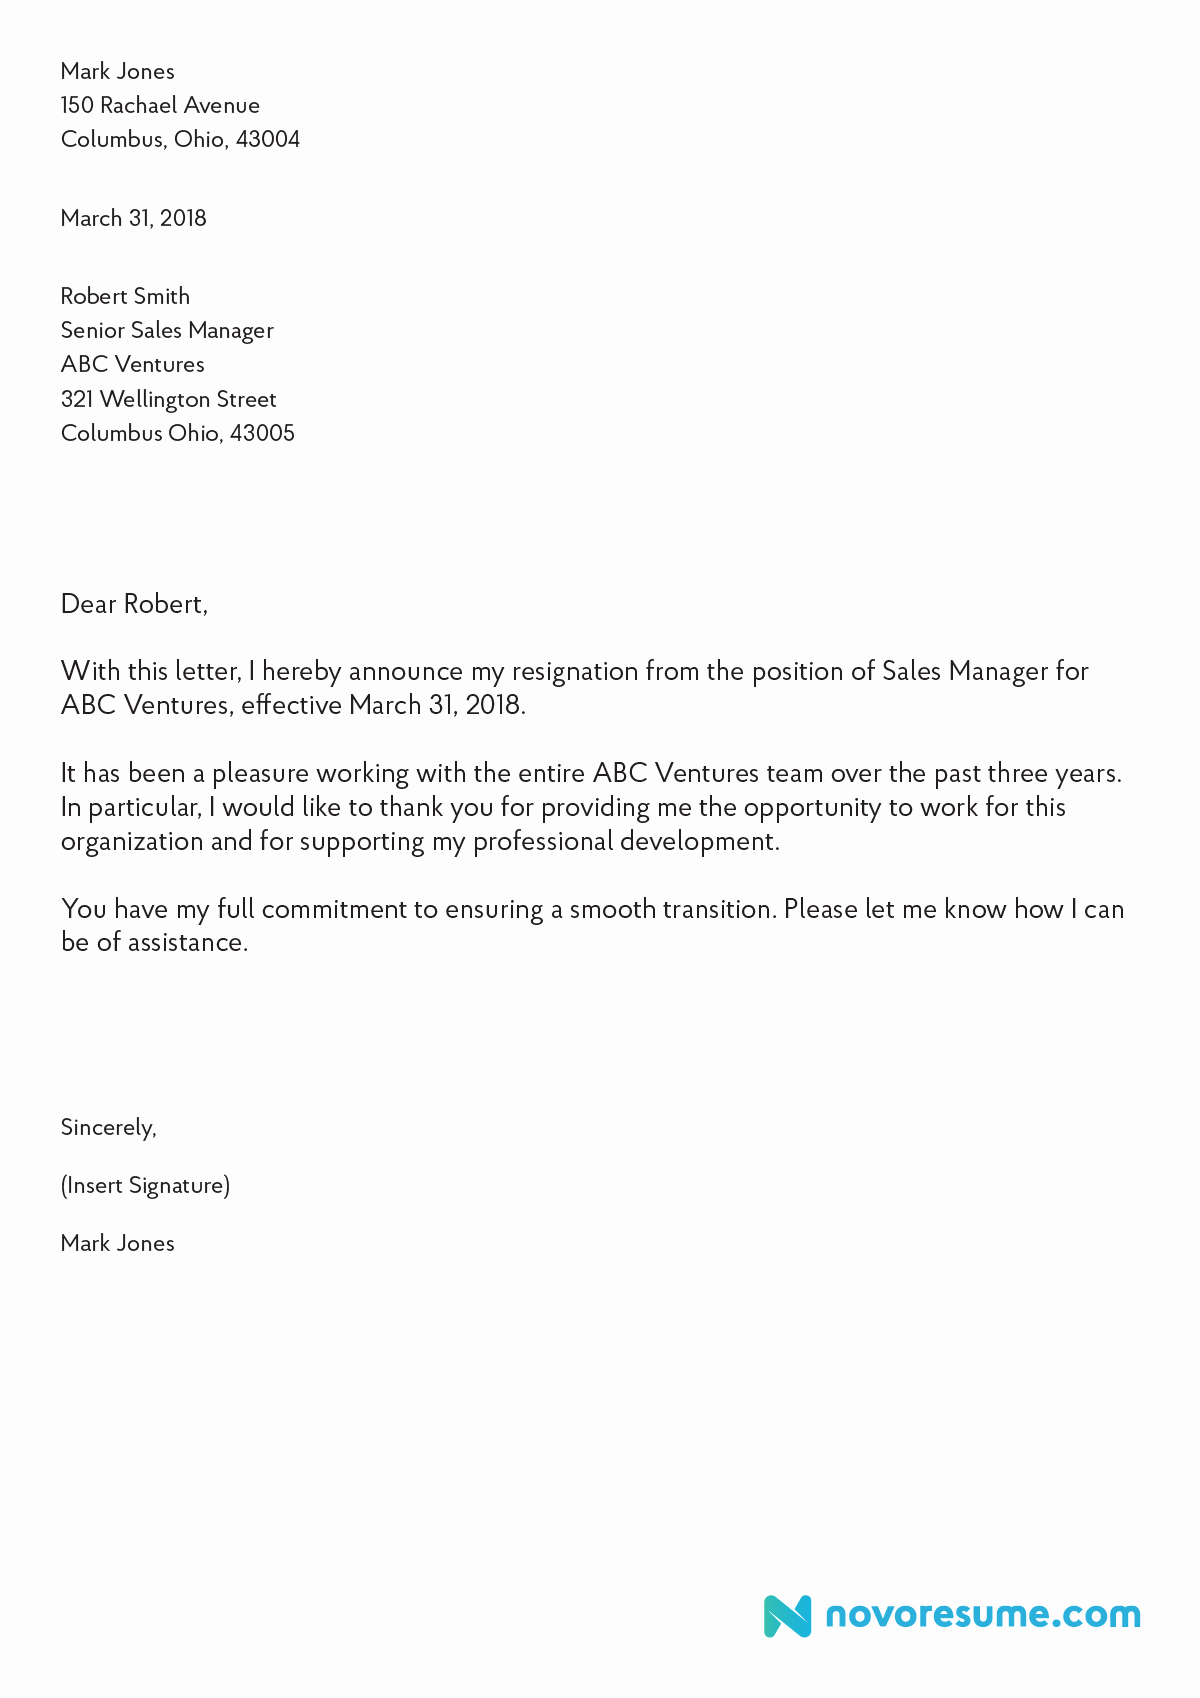 Formal Letters Of Resignation Beautiful How to Write A Letter Of Resignation – 2019 Extensive Guide